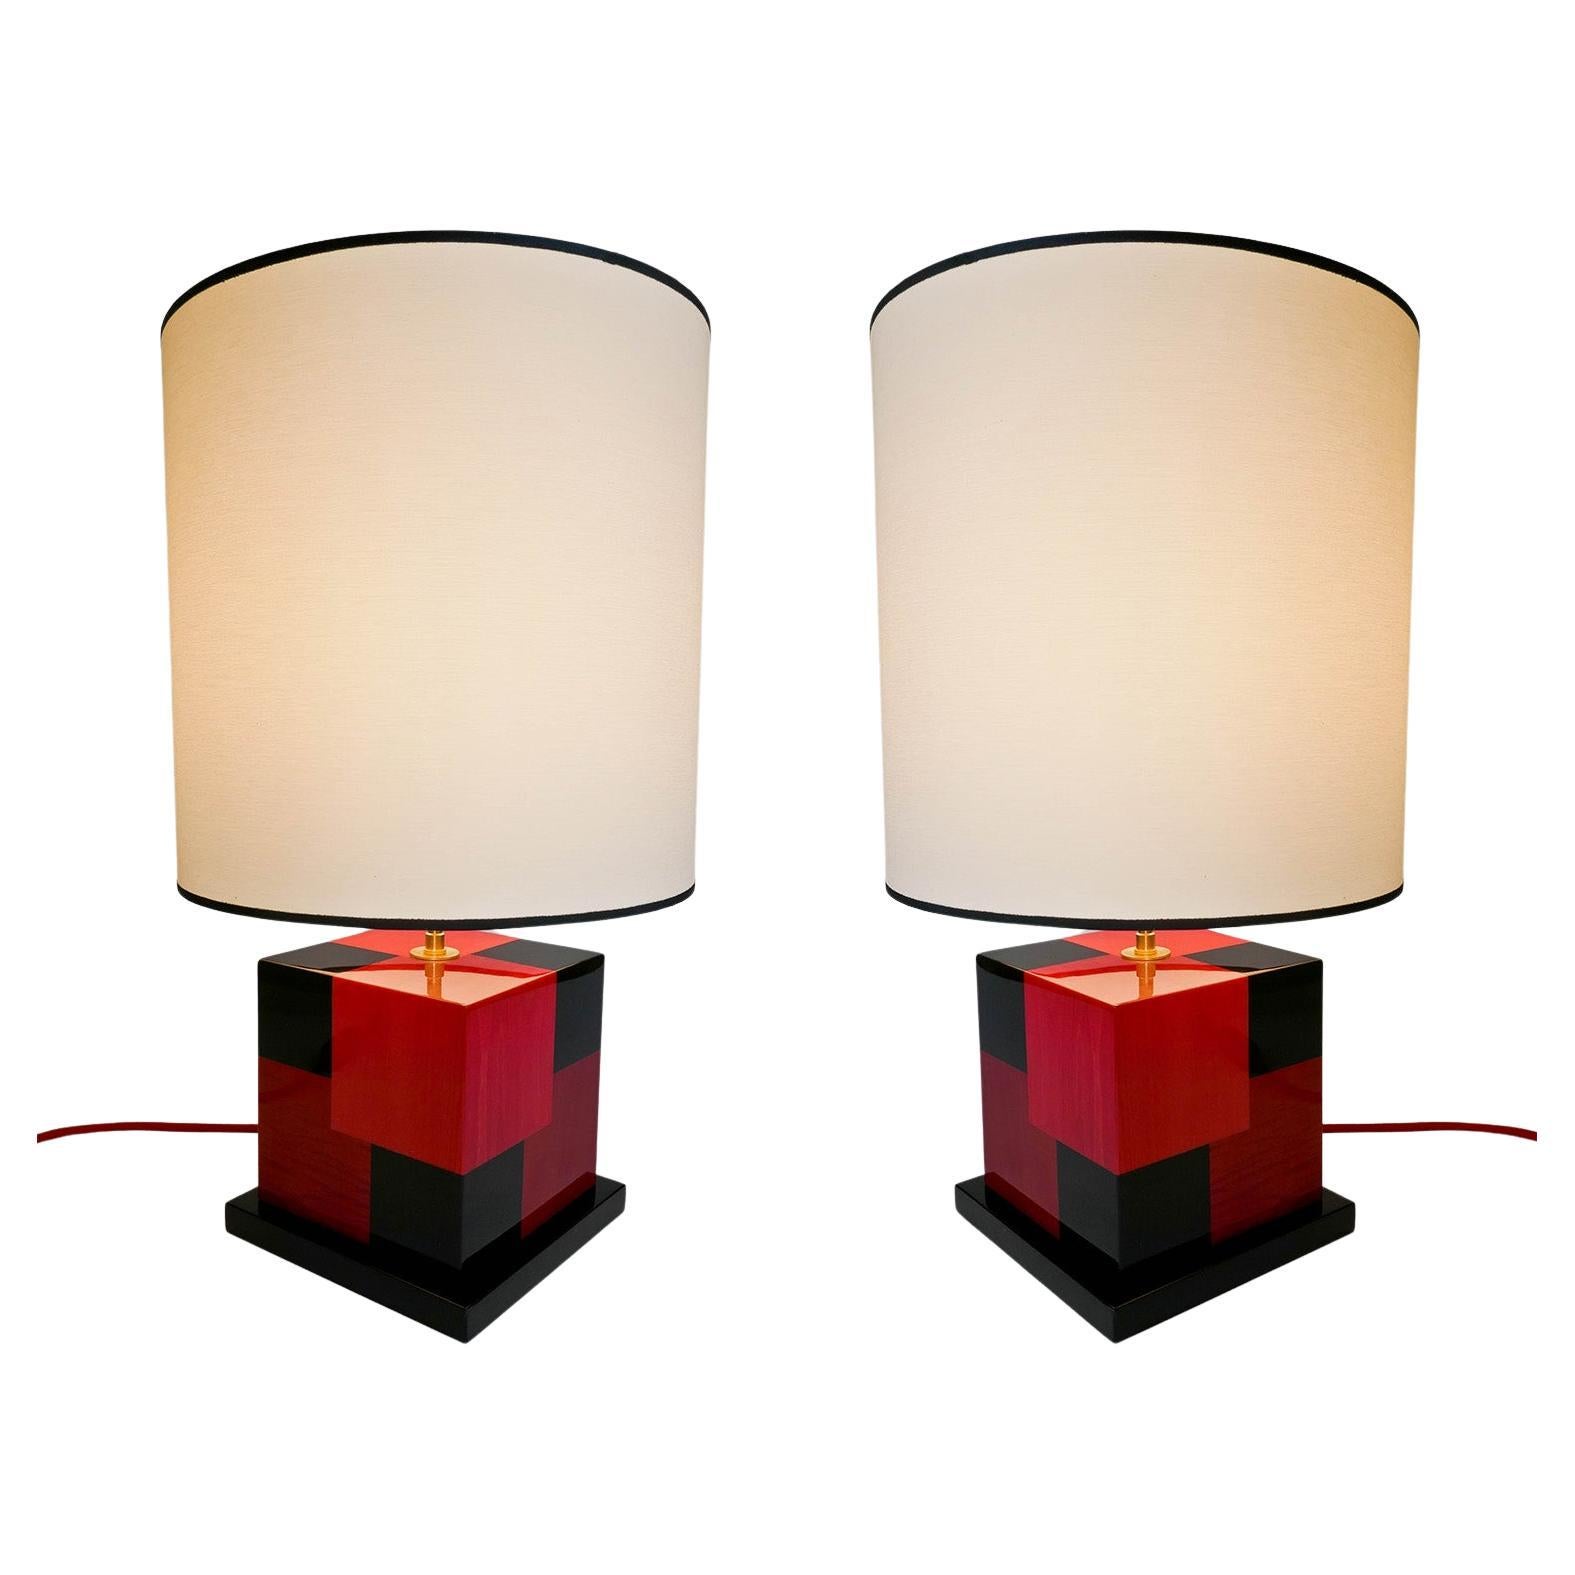 Pair of Table Lamps "Cubes" in Tinted Red and Black Marquetery by Aymeric Lefort